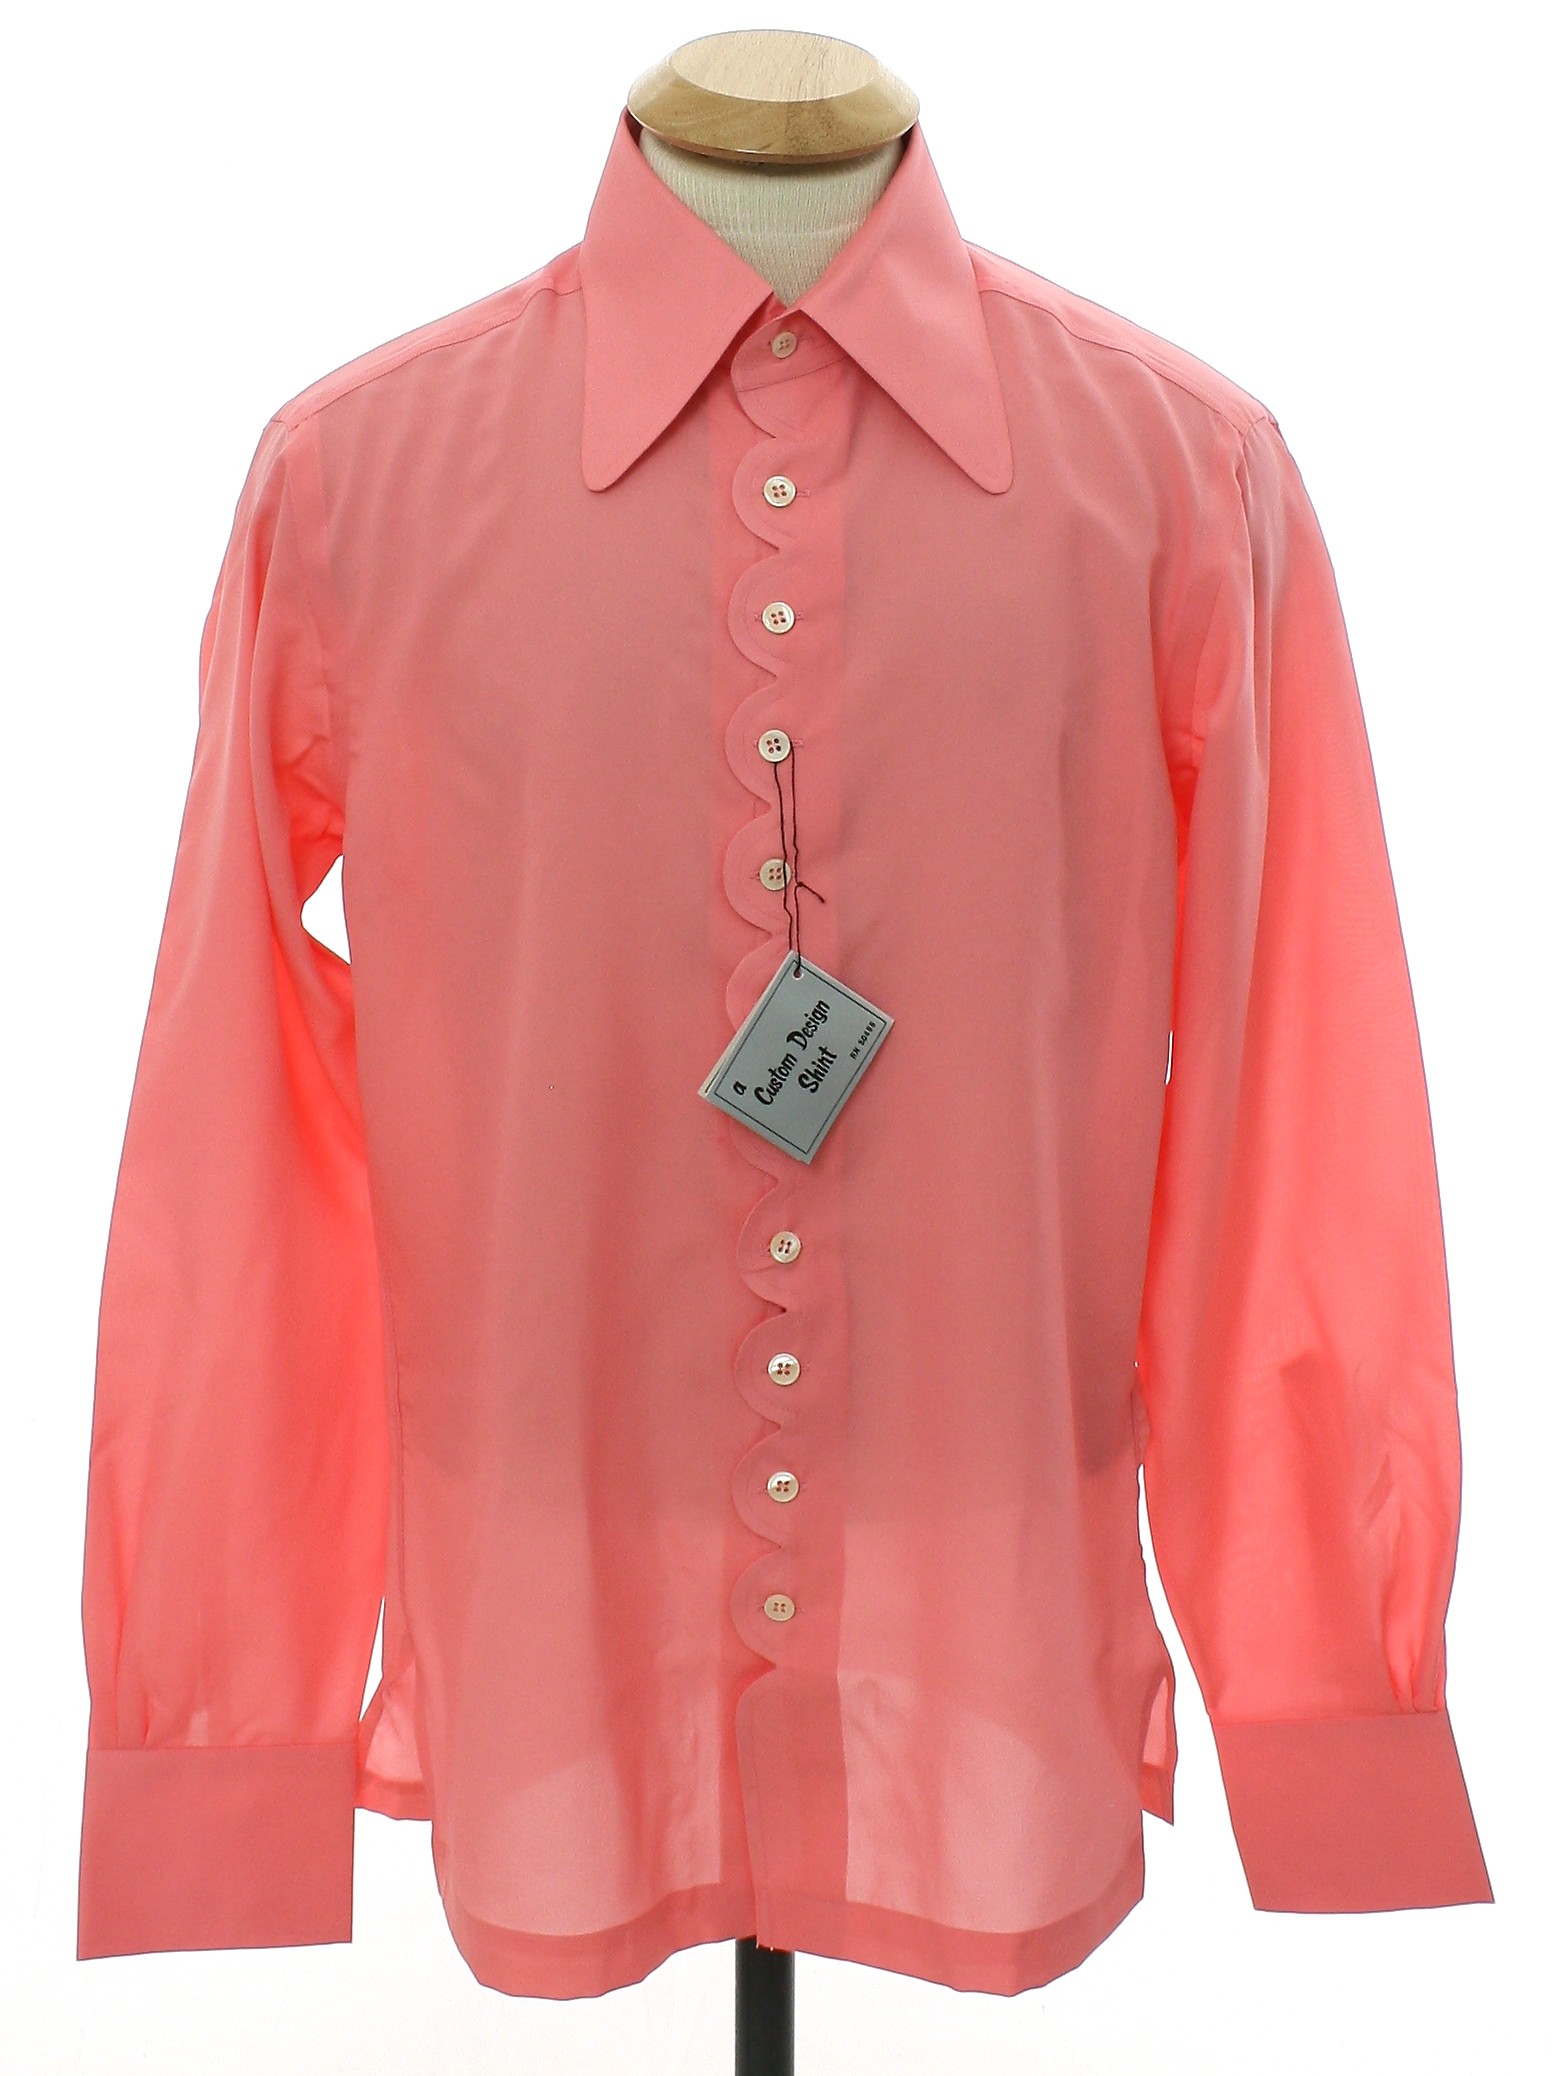 1960's Retro Shirt: 60s -Morrie Geyer- Mens coral pink silky polyester ...